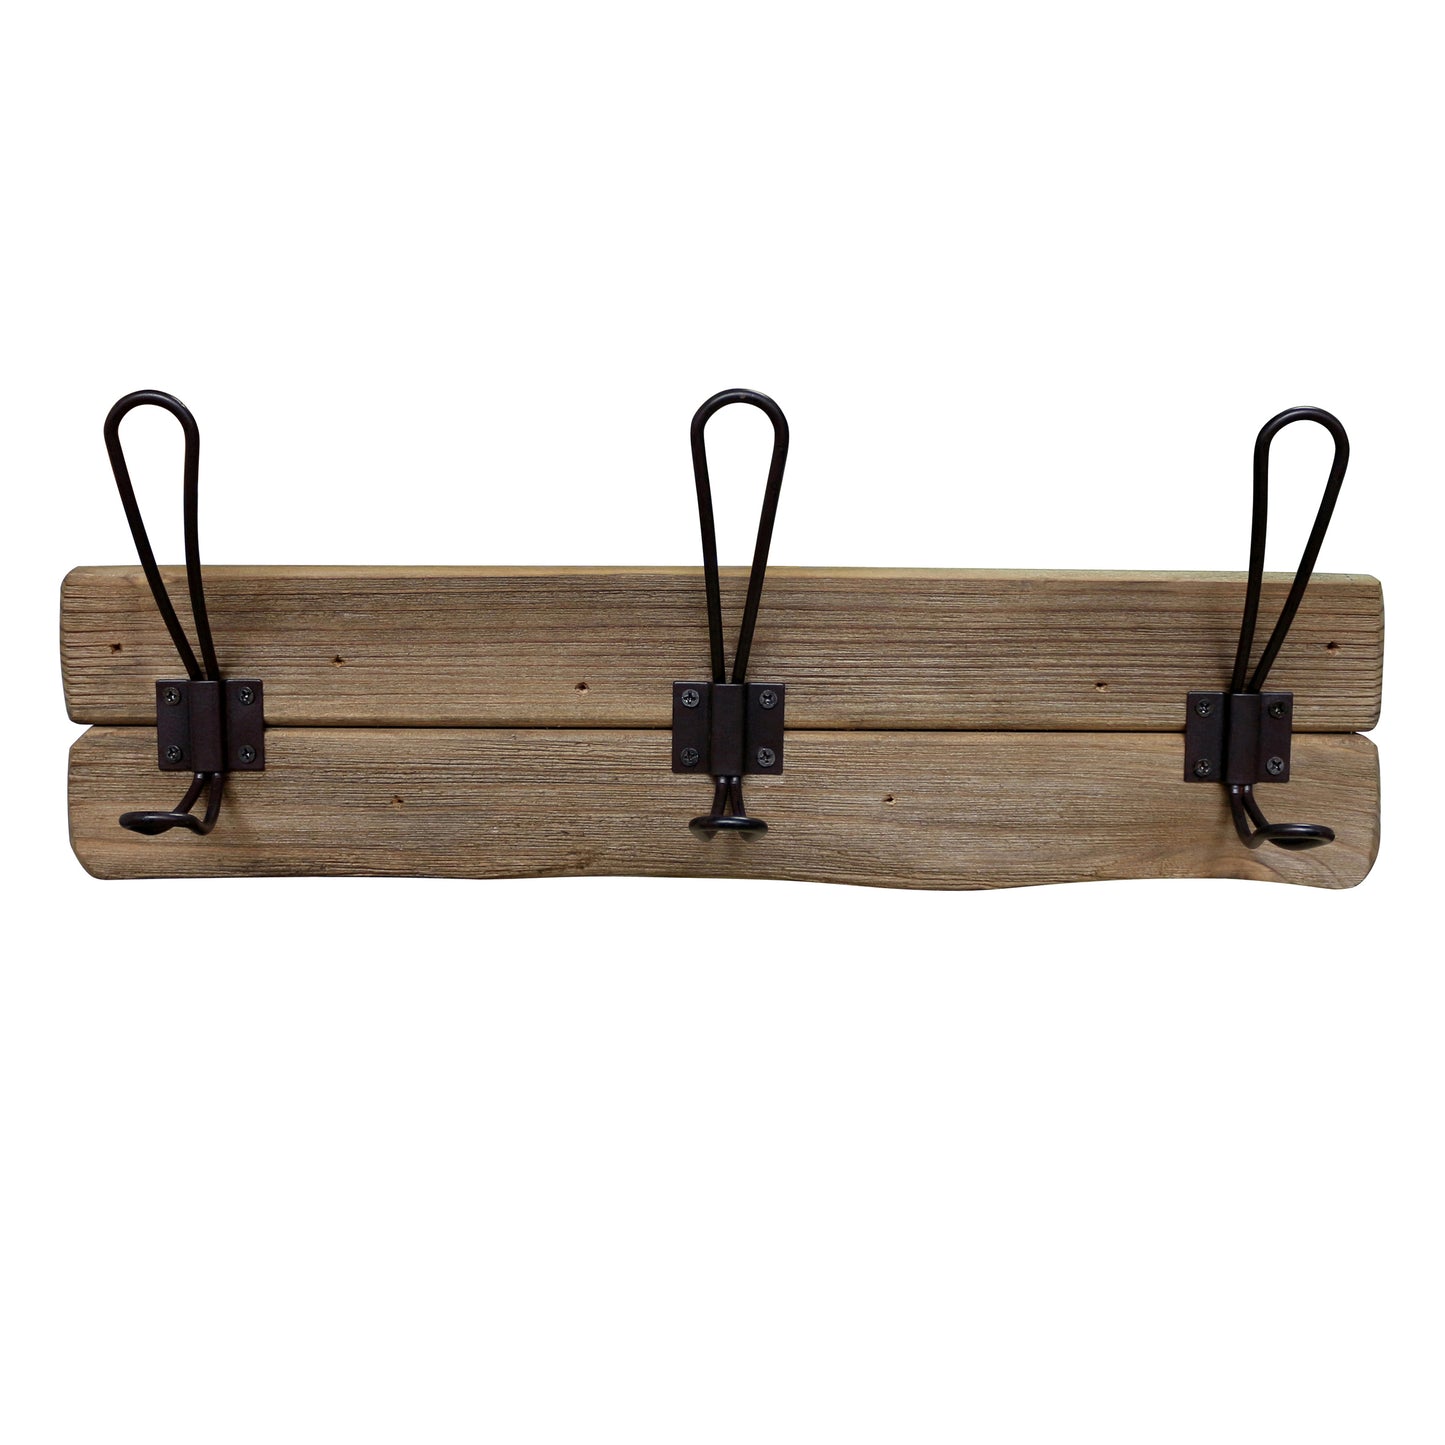 CVHOMEDECO. Rustic Solid Wood Wall Mounted Coat Rack with 3 Double Hooks Primitives Wooden Coat Hooks for Entryway, Kitchen, Bathroom. Brown.